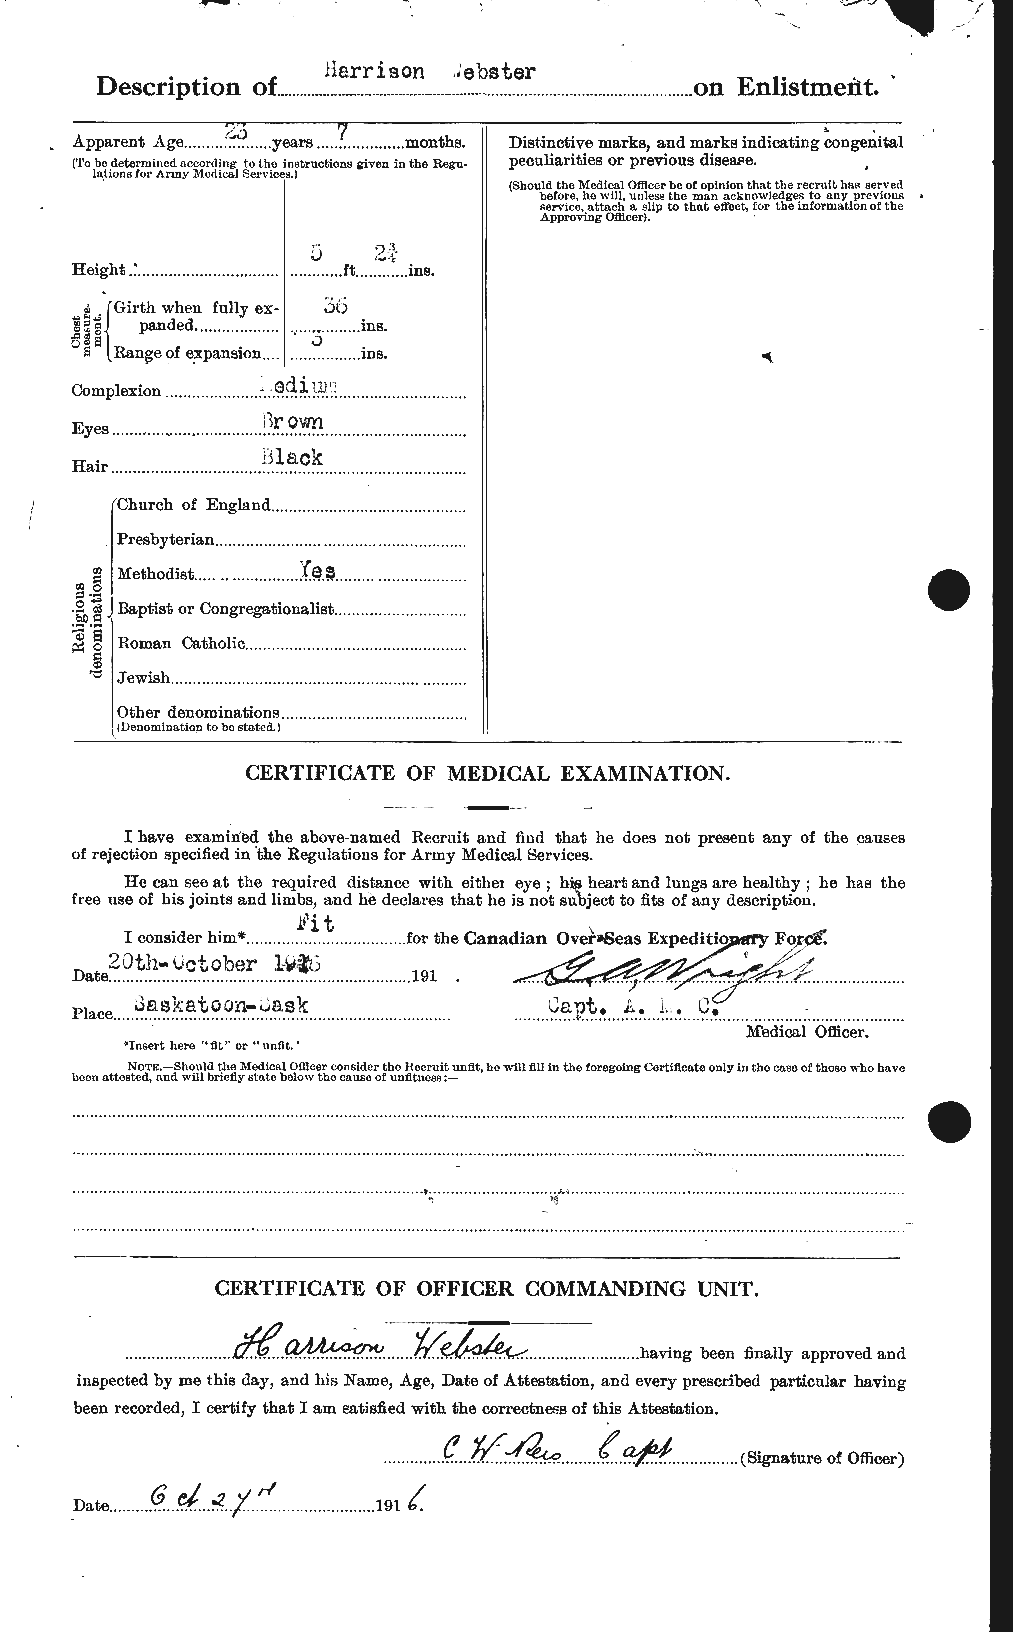 Personnel Records of the First World War - CEF 670408b